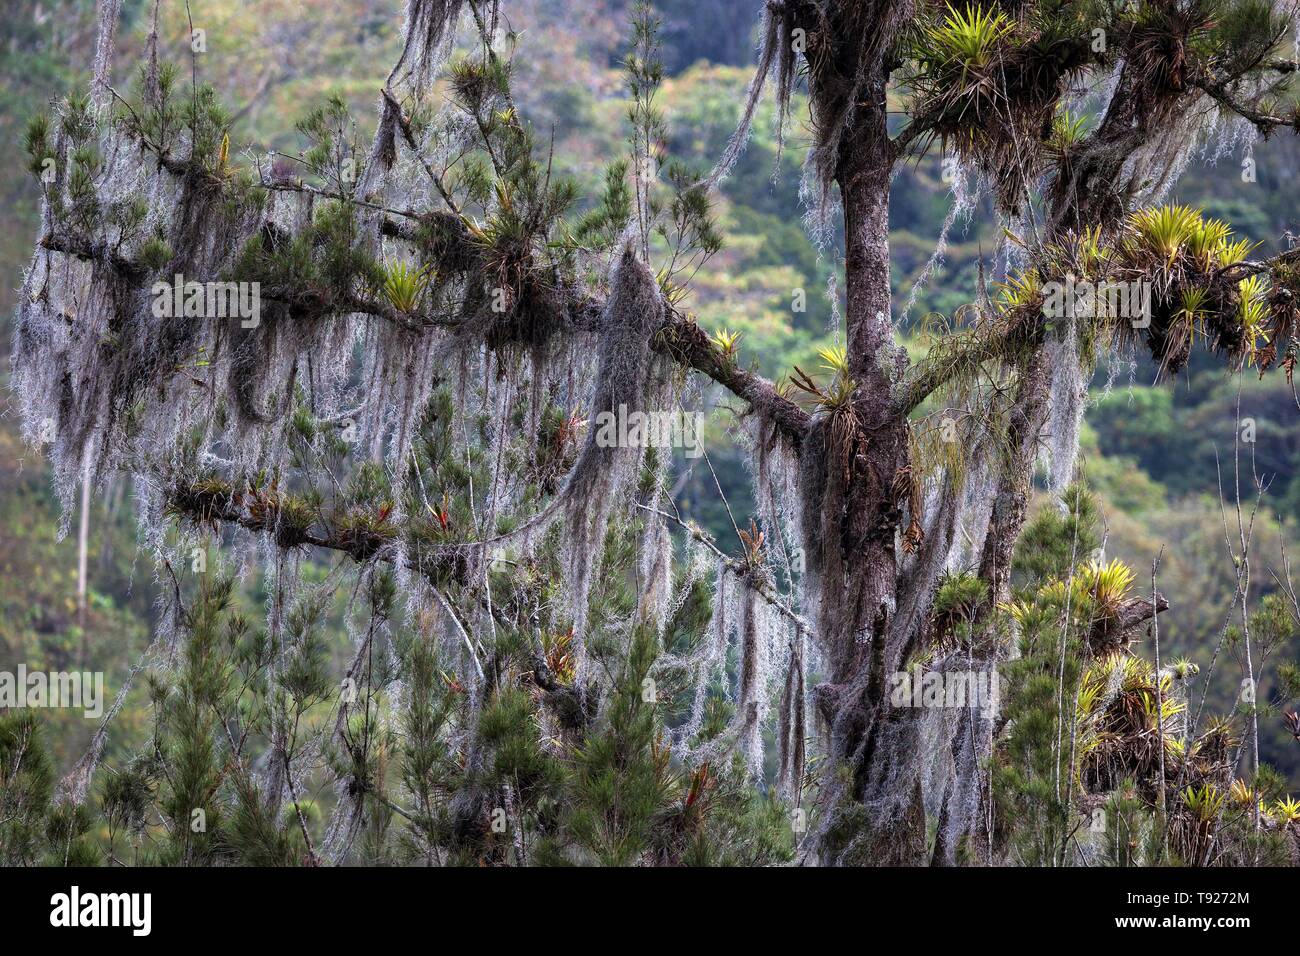 Tree densely overgrown with Old Man's Beards (Usnea), Orosi Valley, Cartago Province, Costa Rica Stock Photo